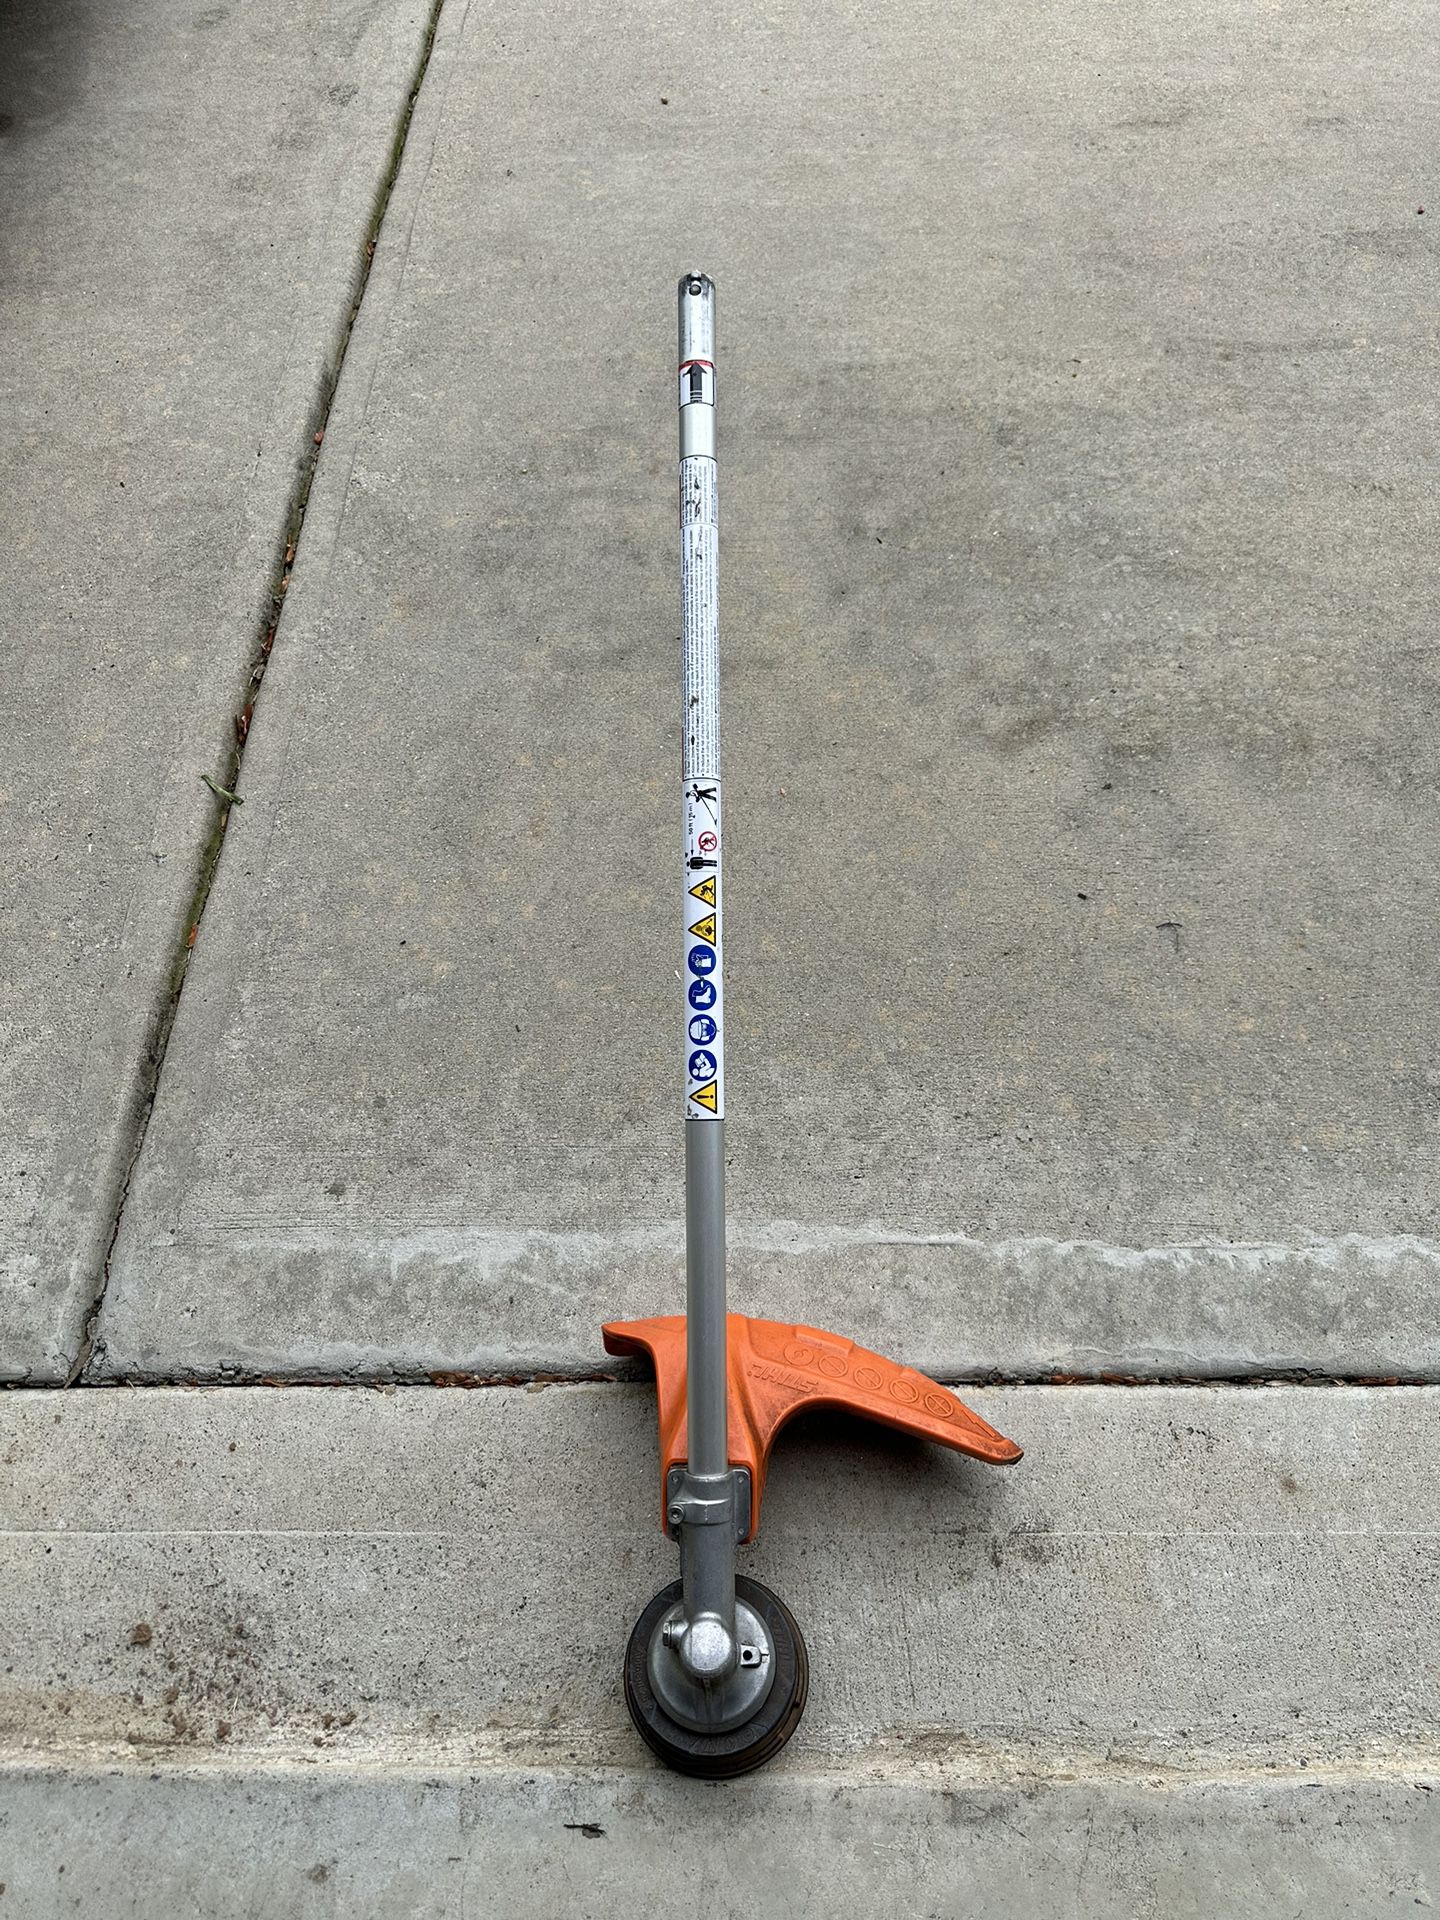 Stihl Trimmer Attachment Only